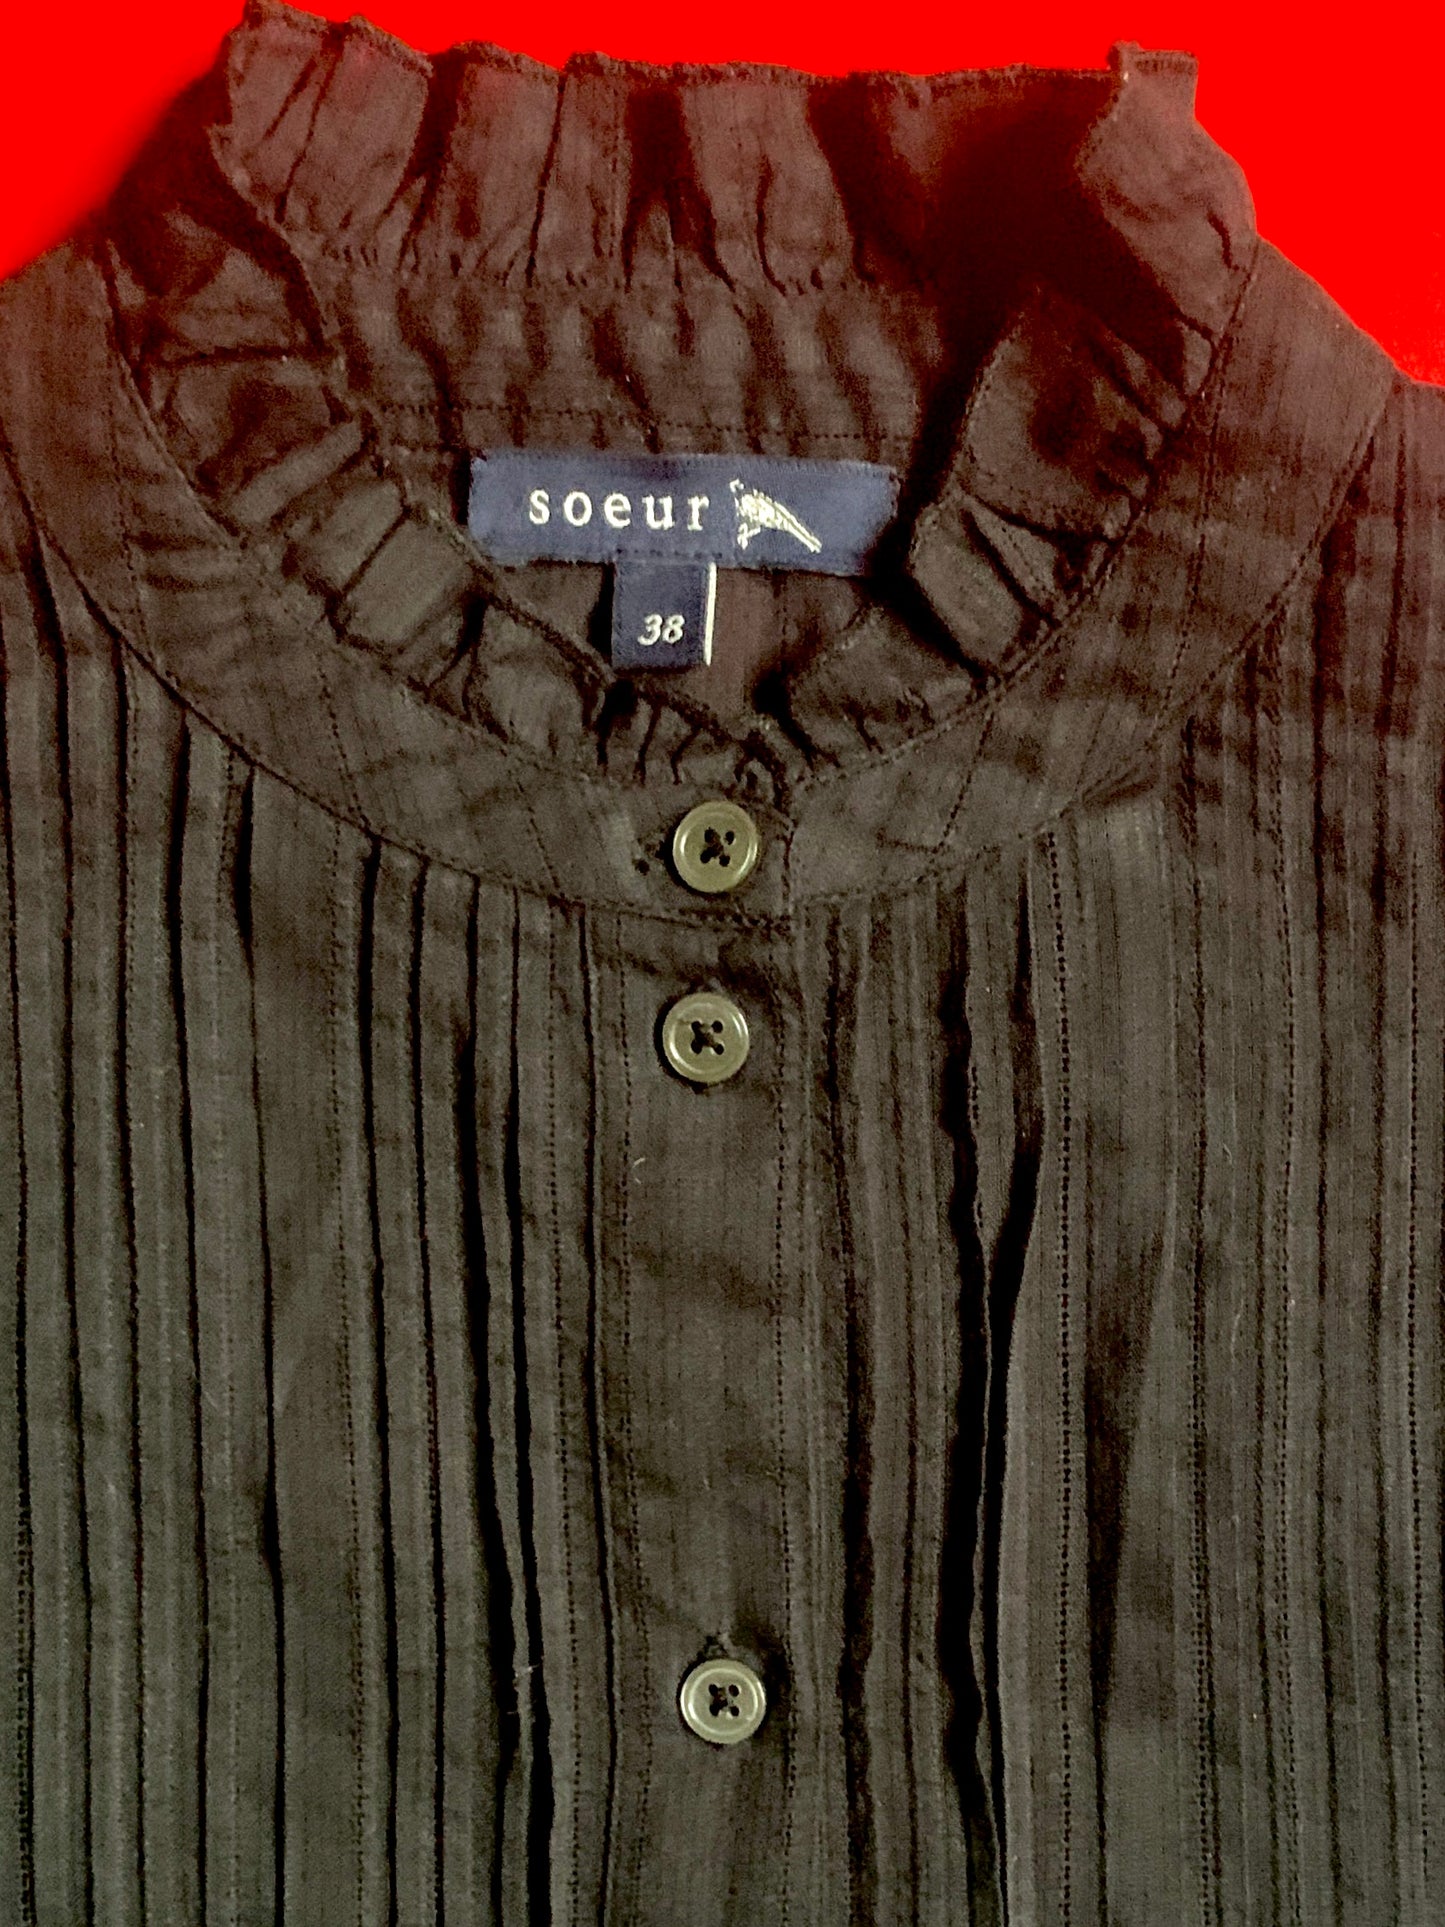 Soeur Pleat Fronted High Collared Shirt.